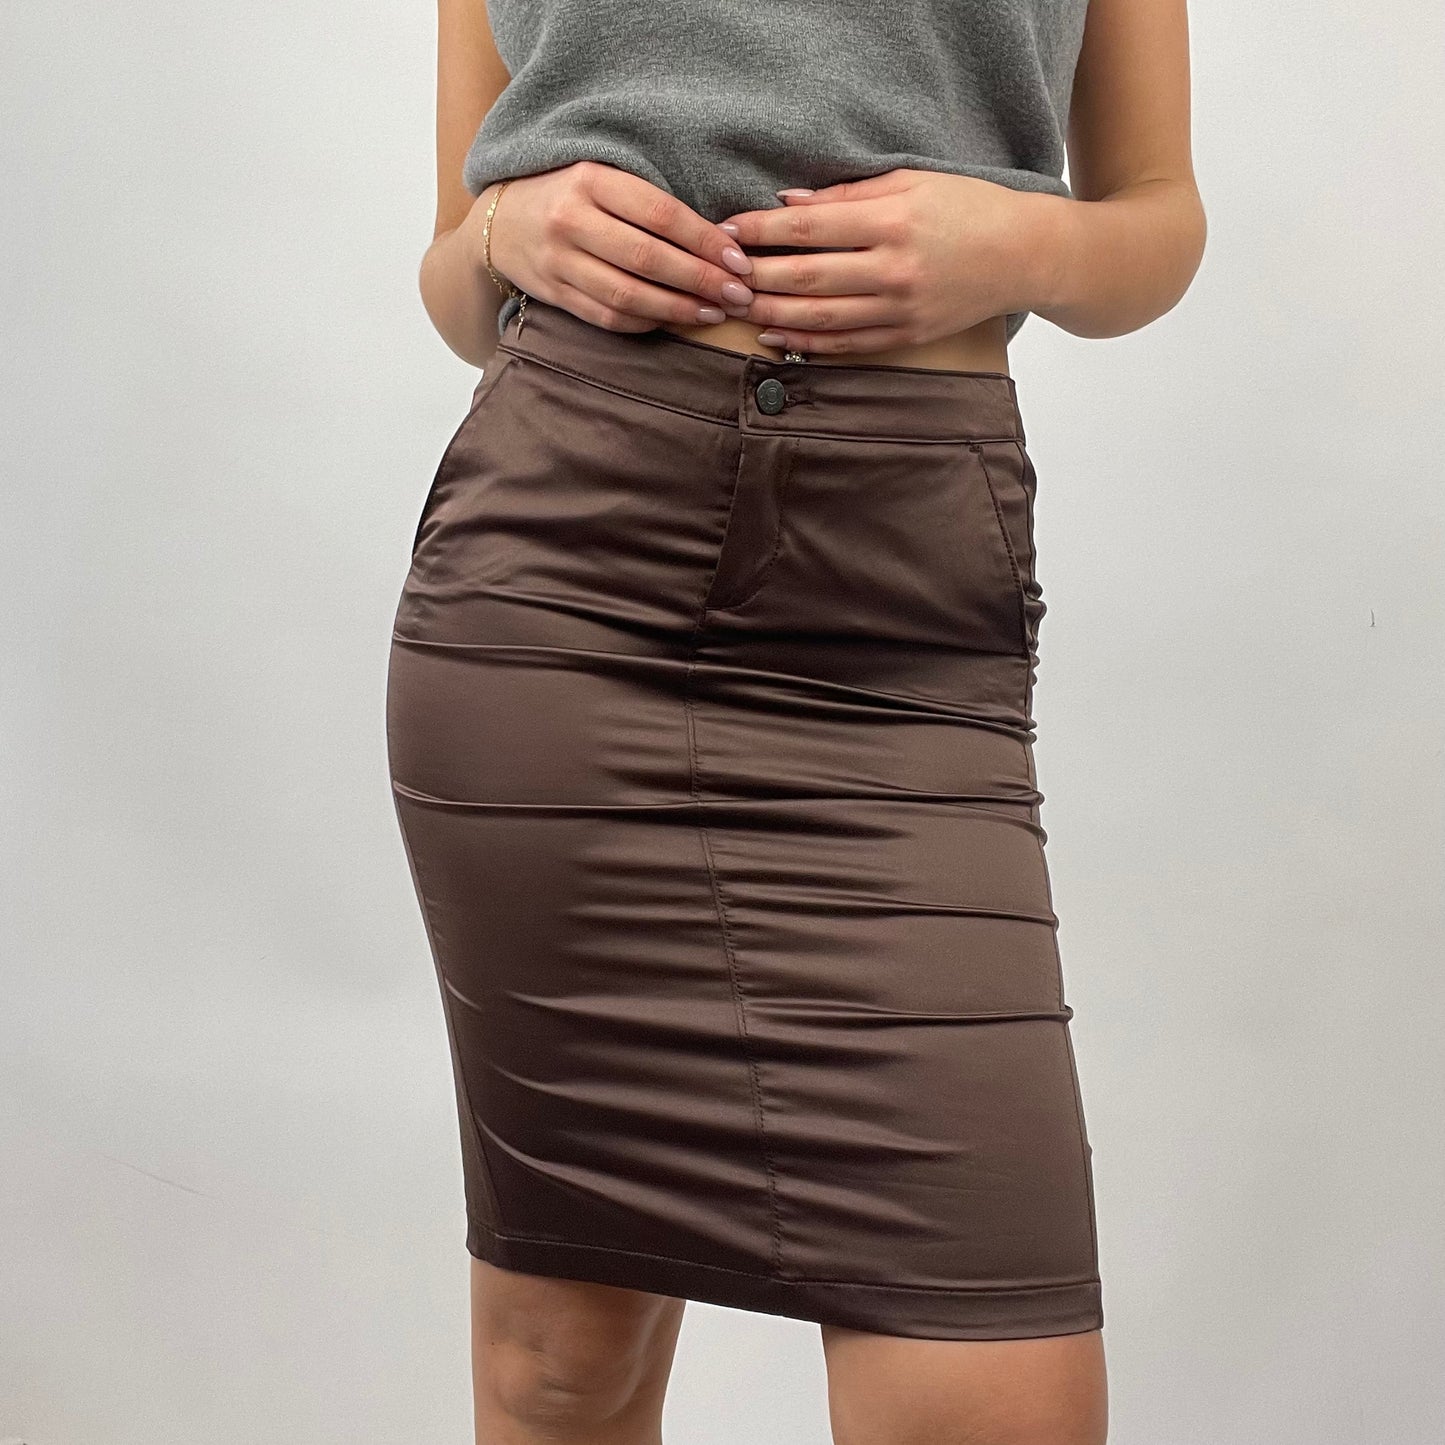 QUIET LUXURY DROP | small brown silky midi skirt with back slit detail